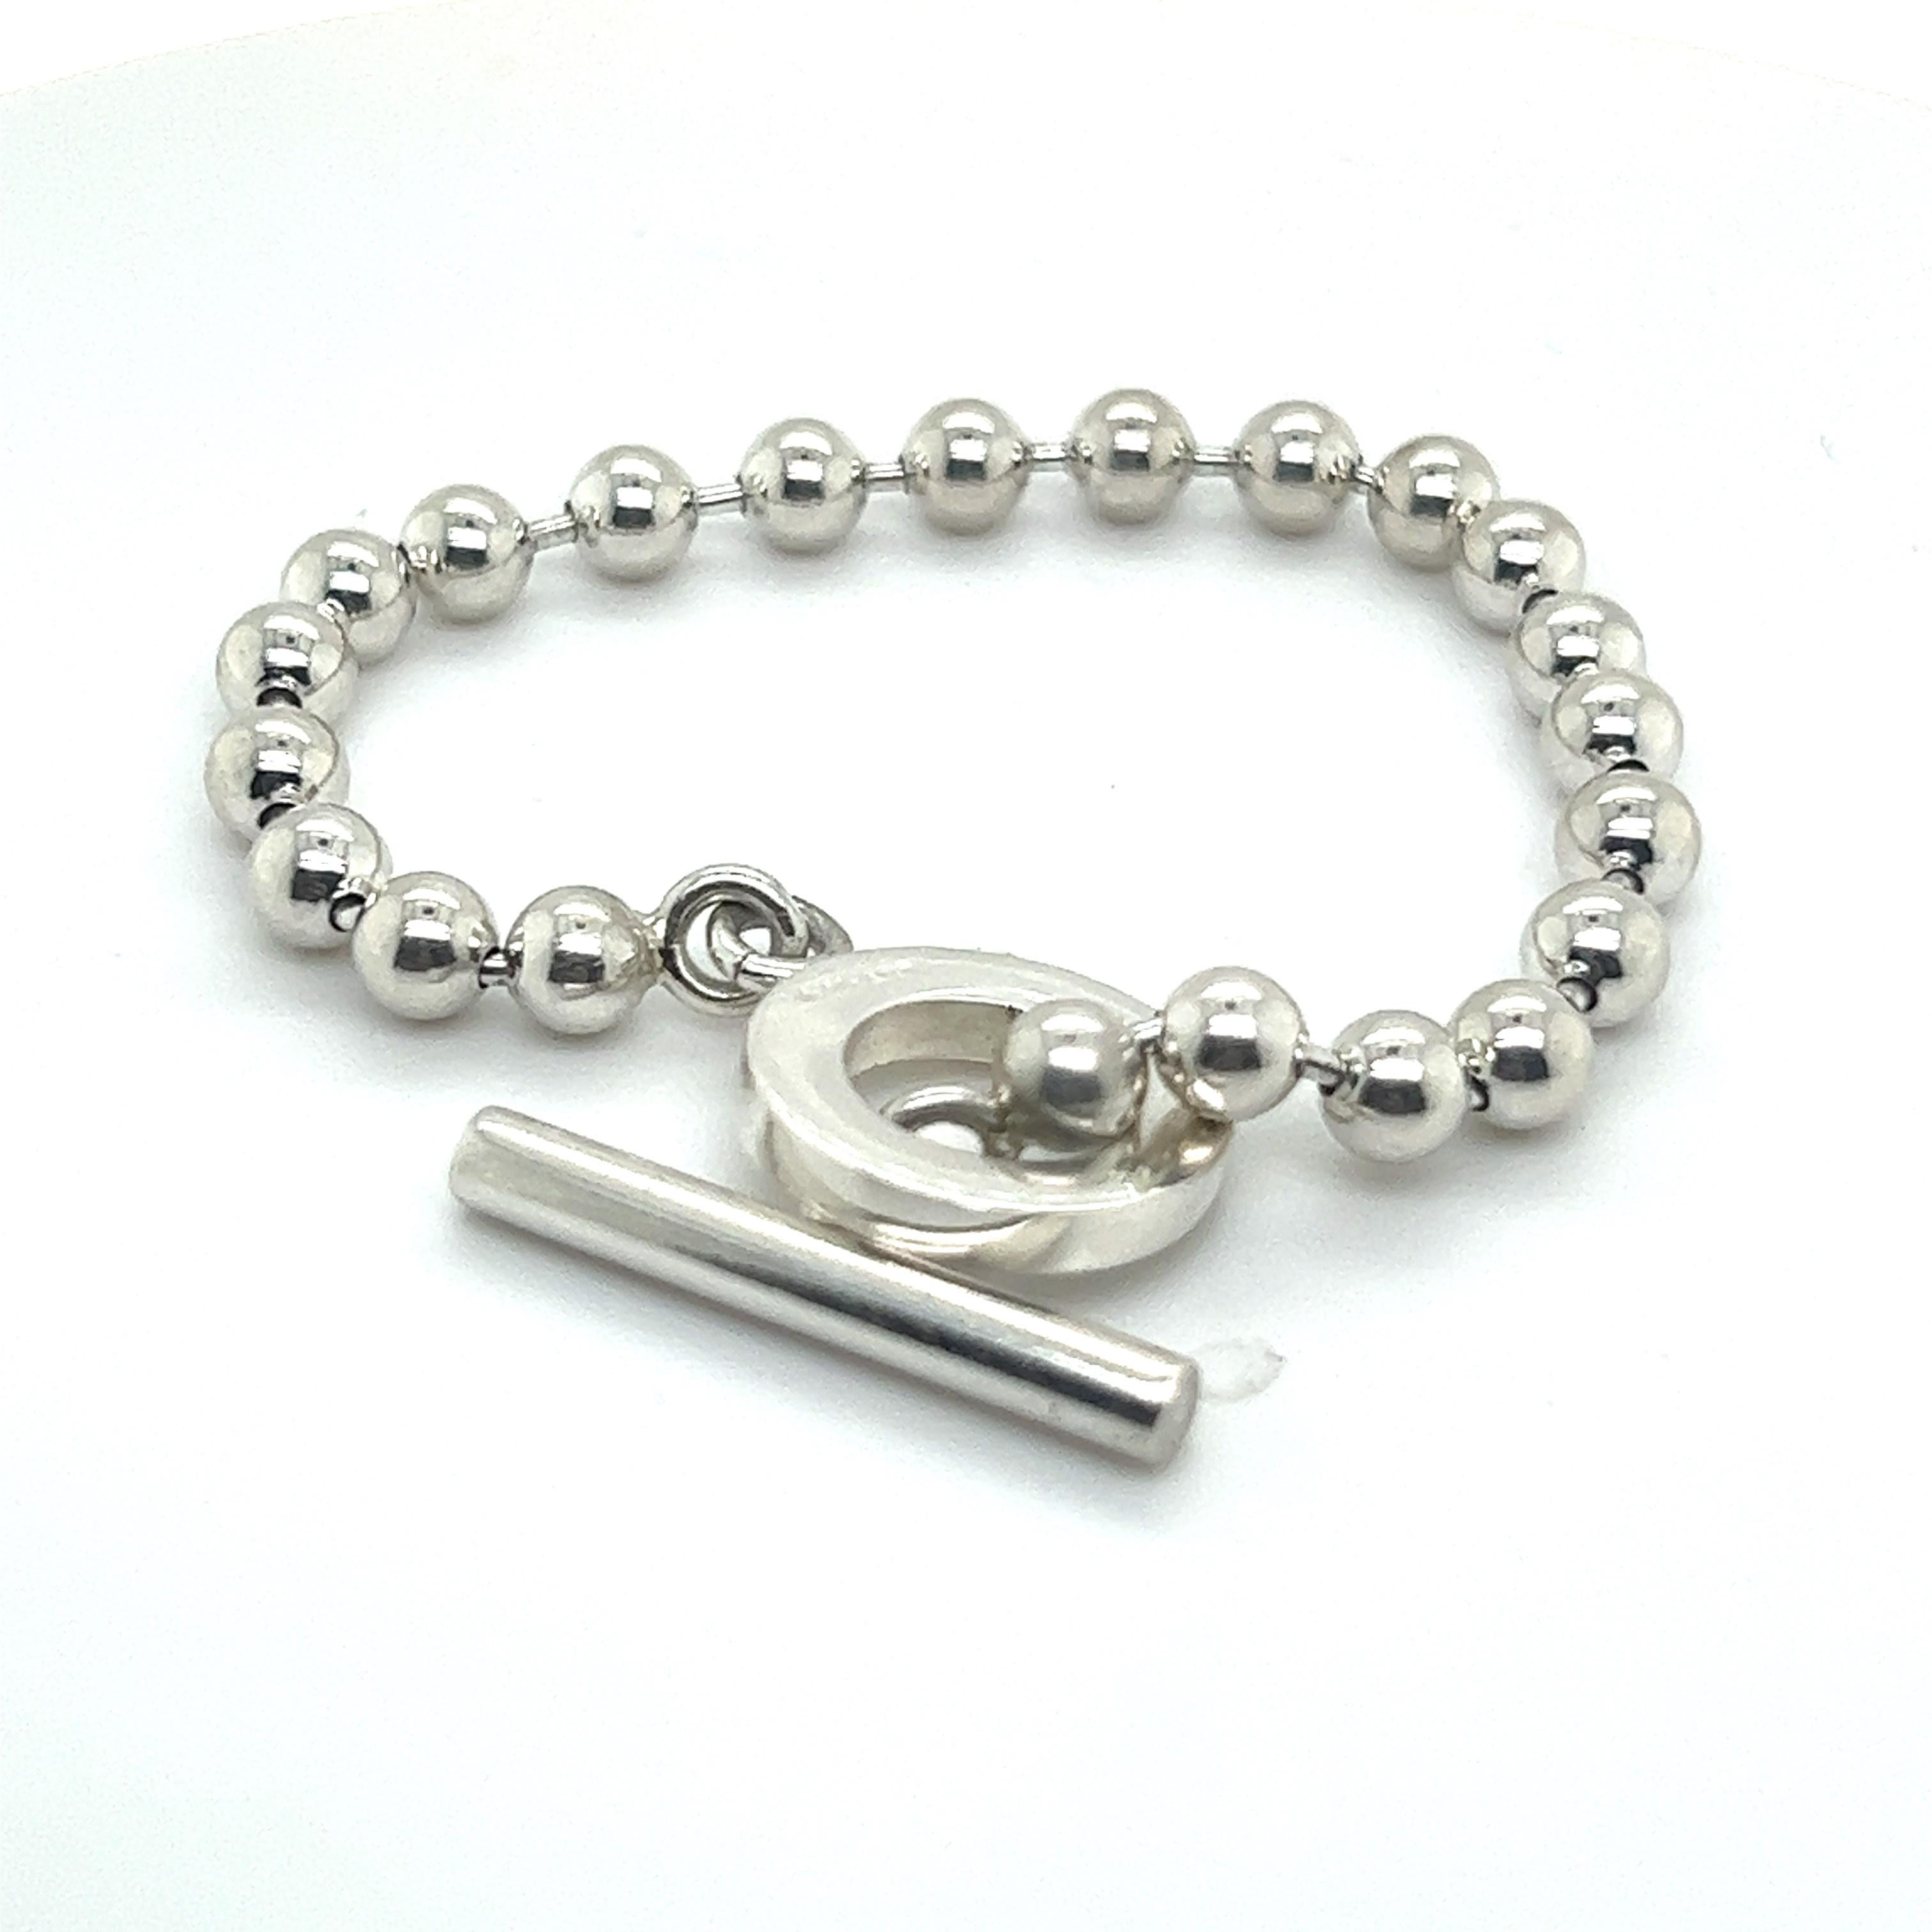 Authentic Gucci Estate Toggle Ball Bracelet 7 inches  Silver 5 mm balls G15

This elegant Authentic Gucci Bracelet is made of sterling silver and has a weight of 29 grams.

TRUSTED SELLER SINCE 2002

PLEASE SEE OUR HUNDREDS OF POSITIVE FEEDBACKS